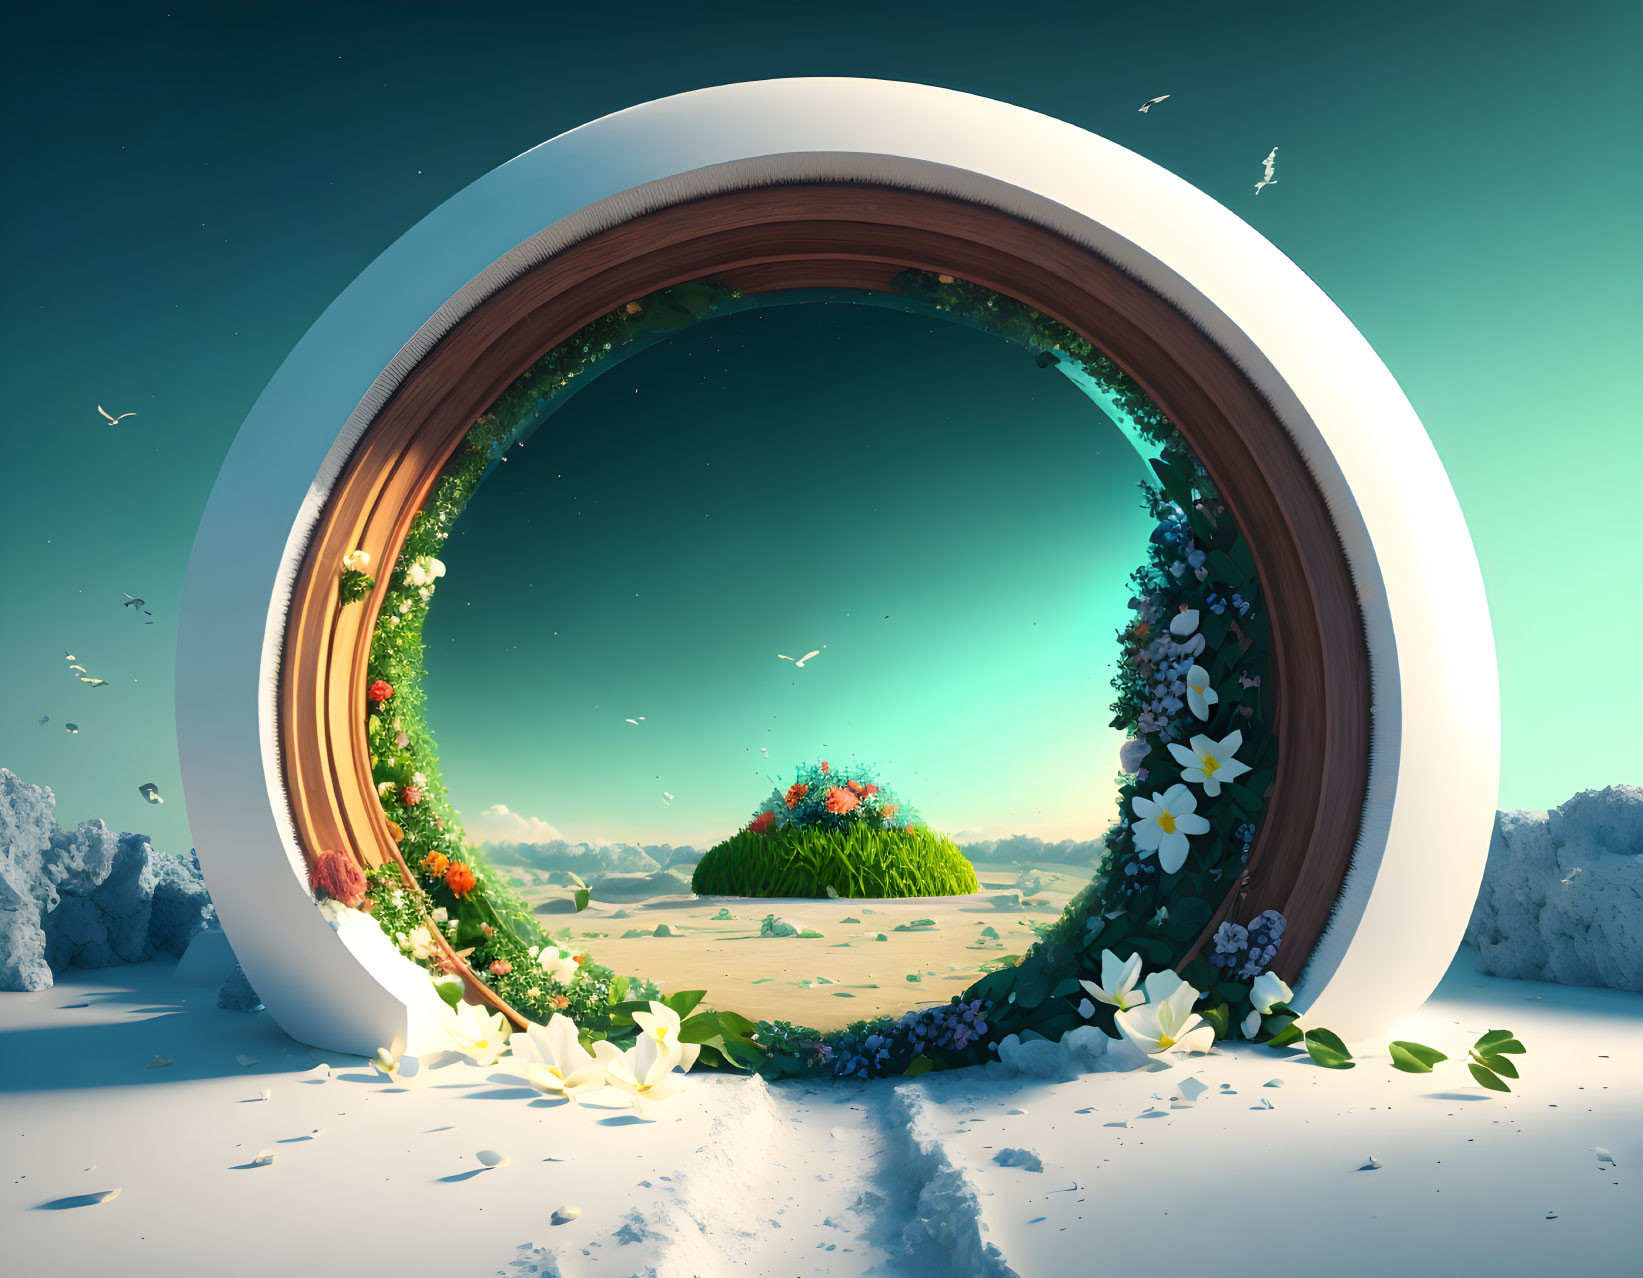 Circular surreal portal with lush green landscape, rocky terrain, clear blue sky, flowers, and birds.